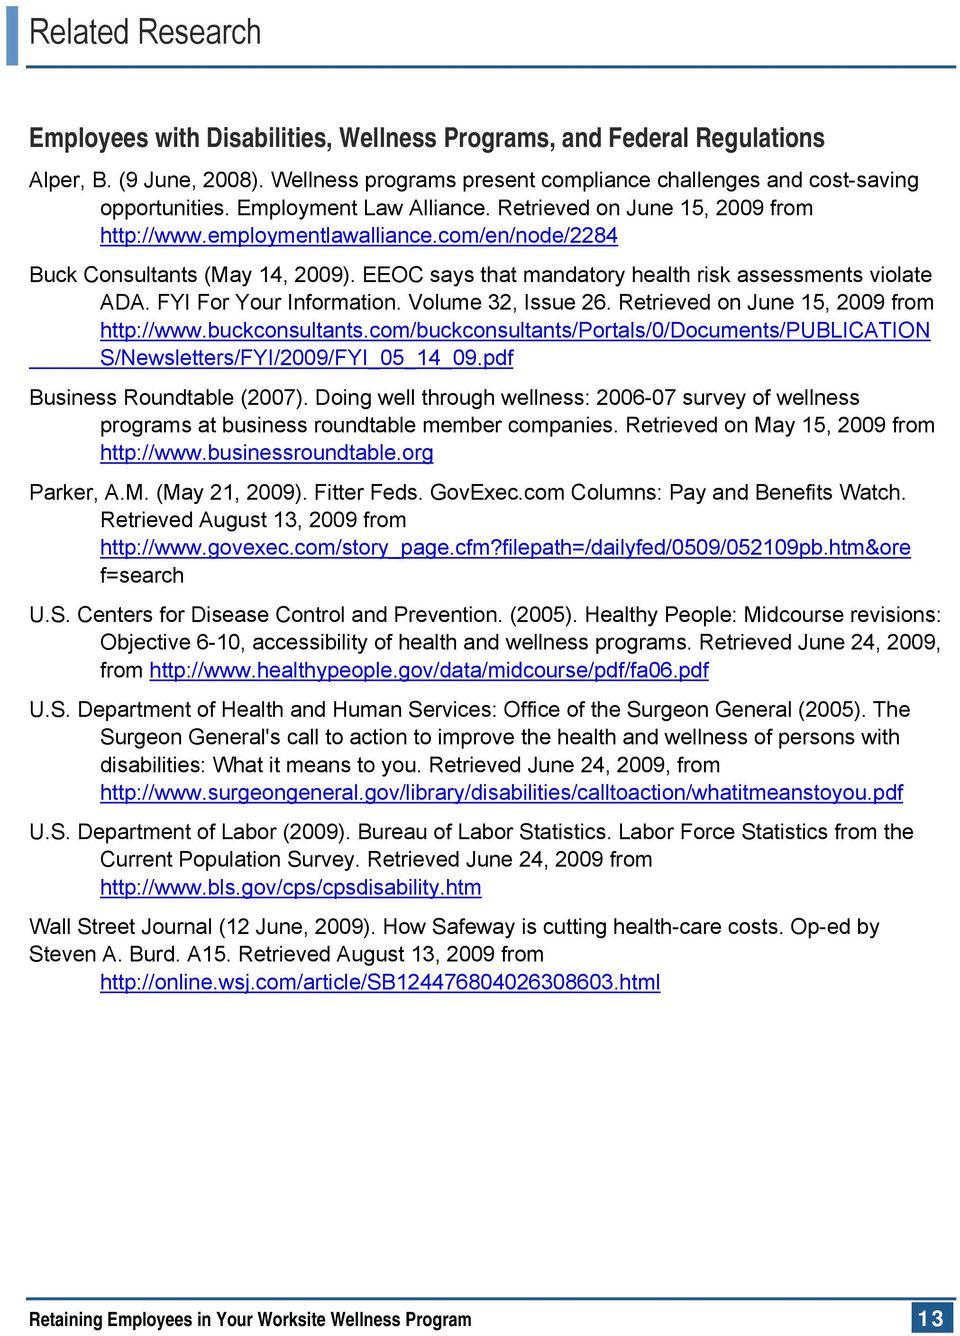 EEOC says that mandatory health risk assessments violate ADA. FYI For Your Information. Volume 32, Issue 26. Retrieved on June 15, 2009 from http://www.buckconsultants.